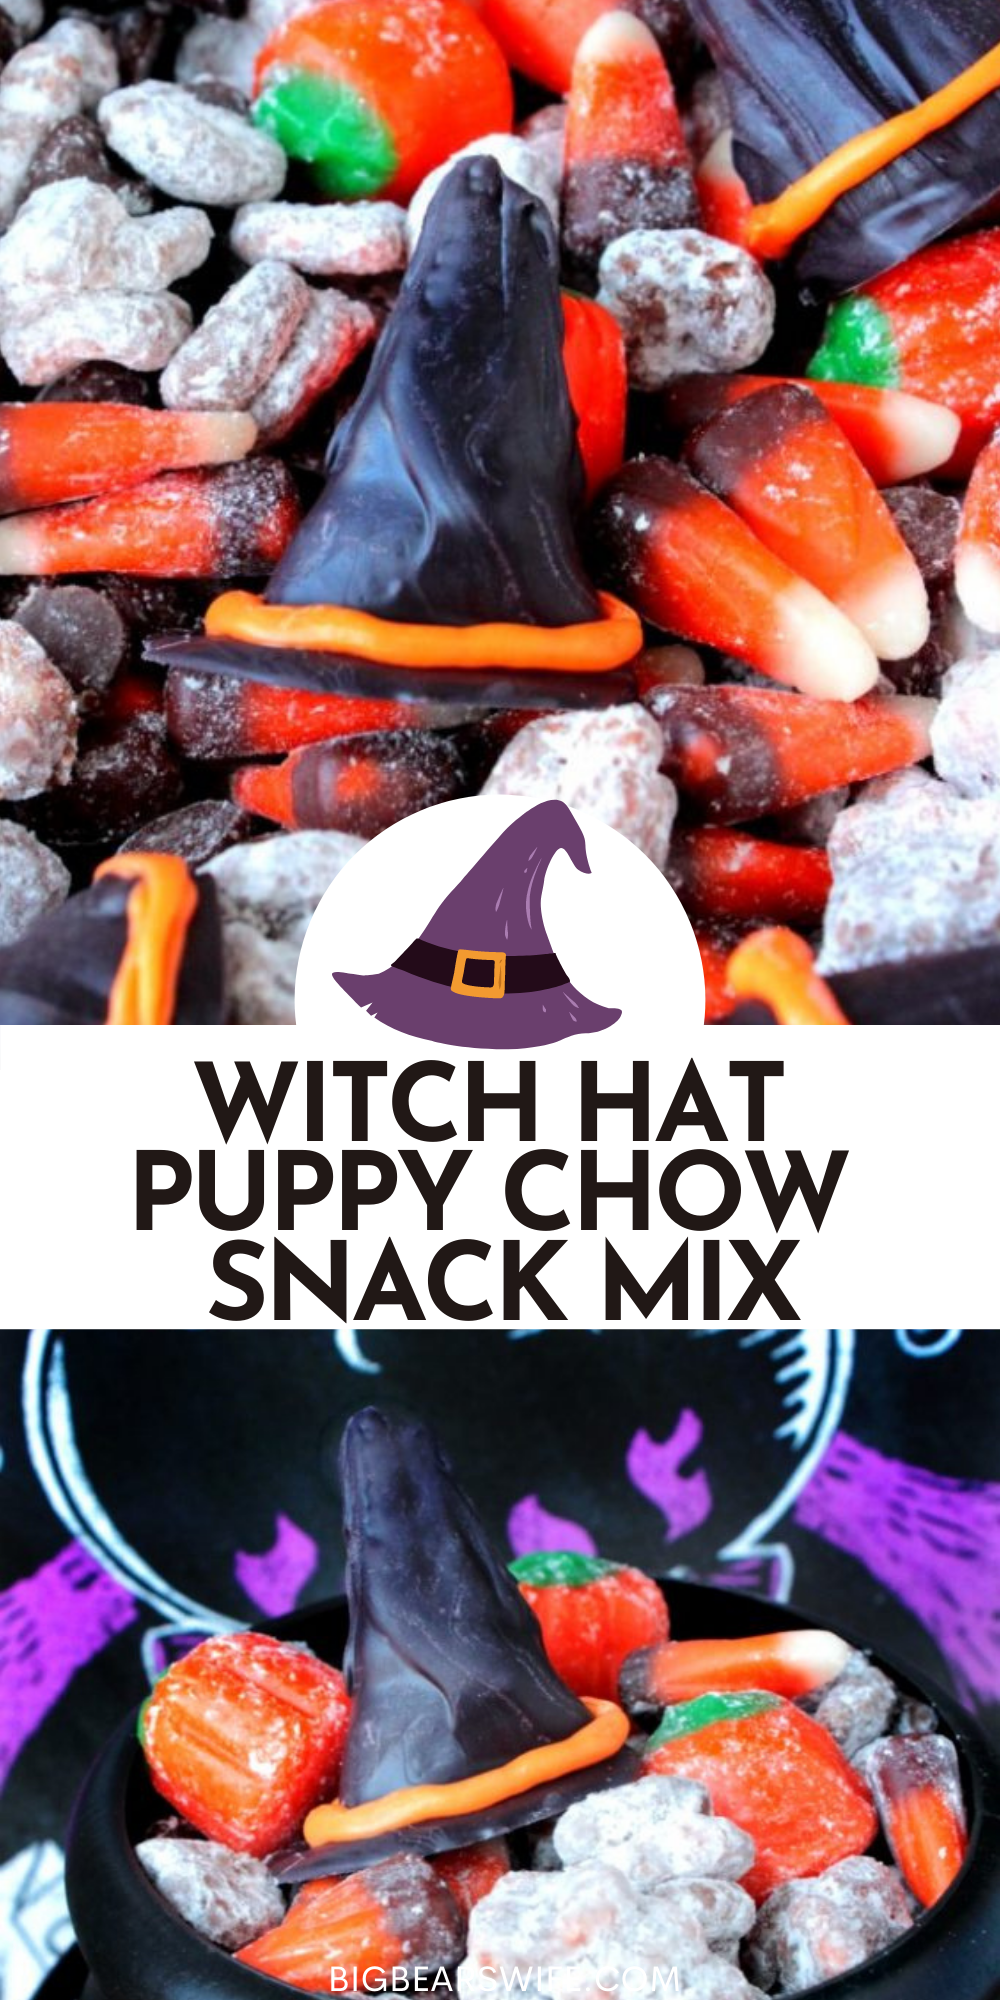 Share this spooky snack with the Halloween witches in your life! This Witch Hat Puppy Chow Snack is packed with Halloween cereal, candy and chocolate witch hats! This is a super cute Halloween treat recipe that is all about witches. Everyone will love this super cute Halloween Chex Mix Recipe! Halloween Muddy Buddy Recipe and more on BigBearsWife.com via @bigbearswife